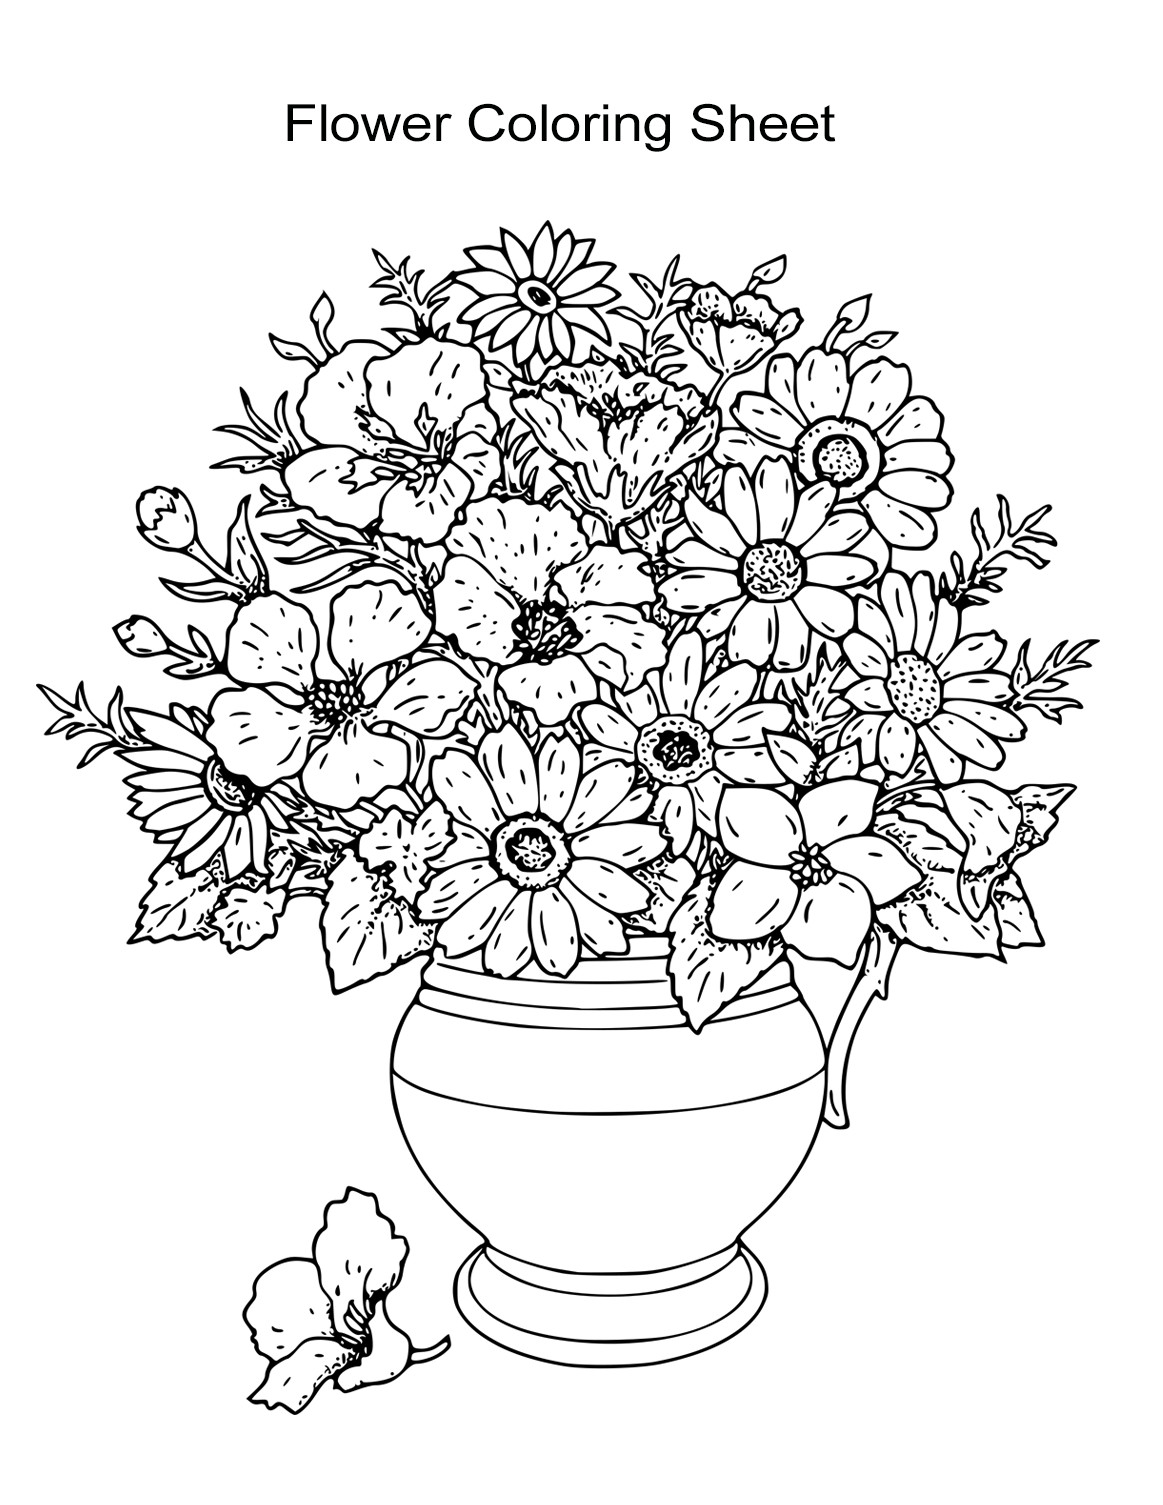 Flower Coloring Sheets For Boys
 10 Flower Coloring Sheets for Girls and Boys Free